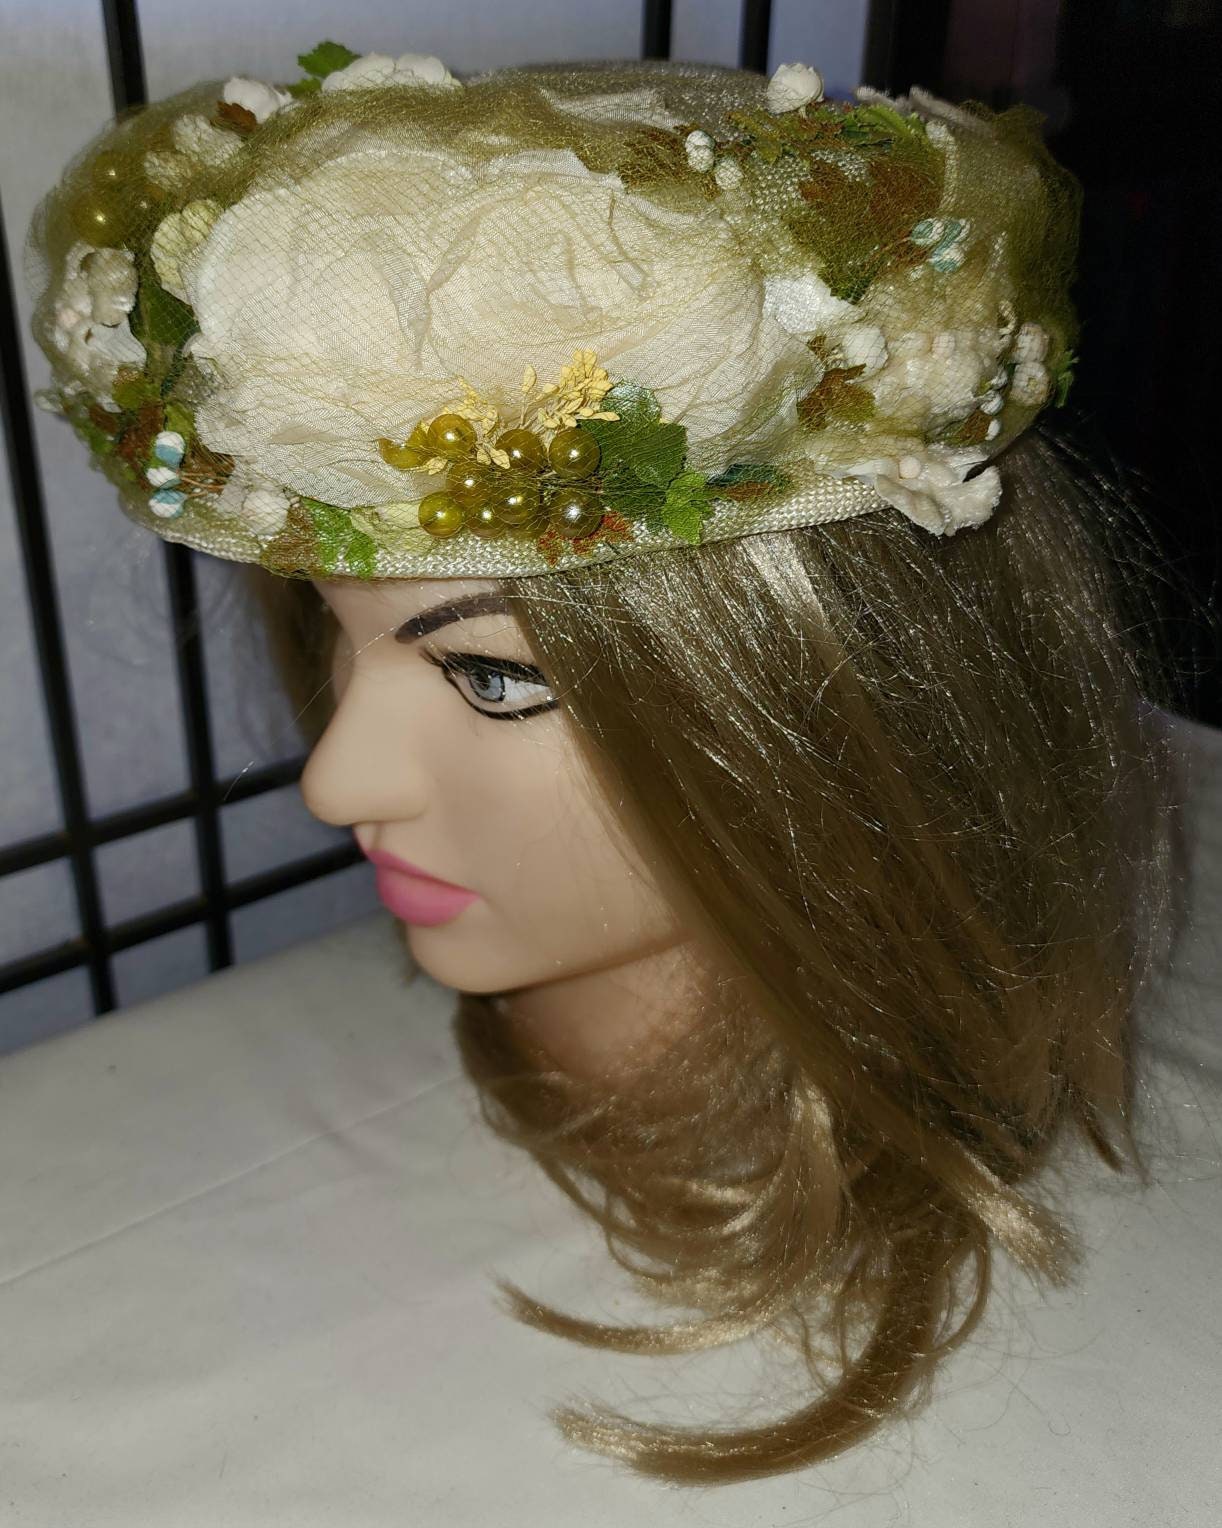 Vintage Floral Hat 1950s 60s Large Round Yellow Green Cream Floral Net Hat Round Bubble Ornaments Mid Century Garden Party 20 in.